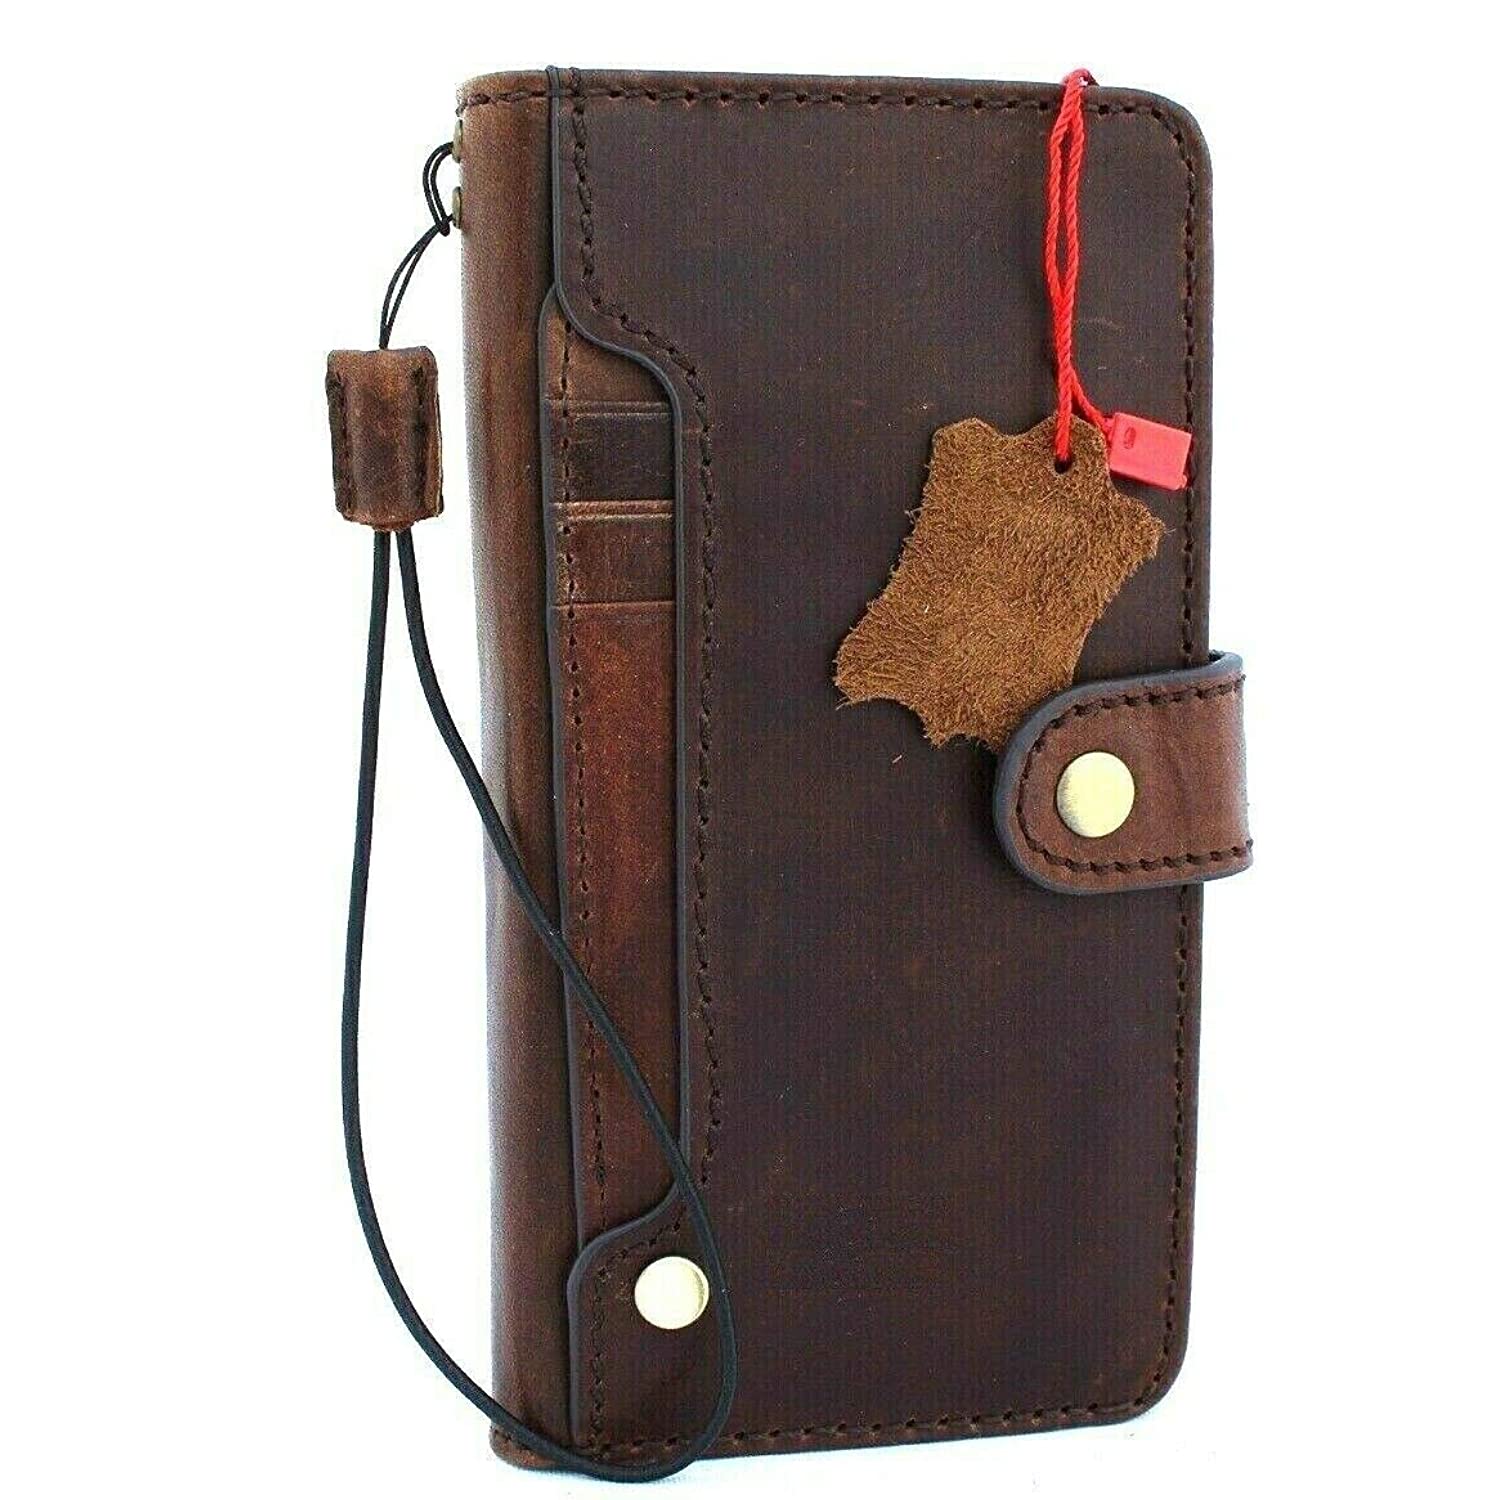 JAFO Genuine Real Leather Case for Google Pixel XL 4 Book Wallet Handmade Vintage Cover Luxury Cards Rubber Holder Stand Slim Classic Brown flip Strap Button Closure ID